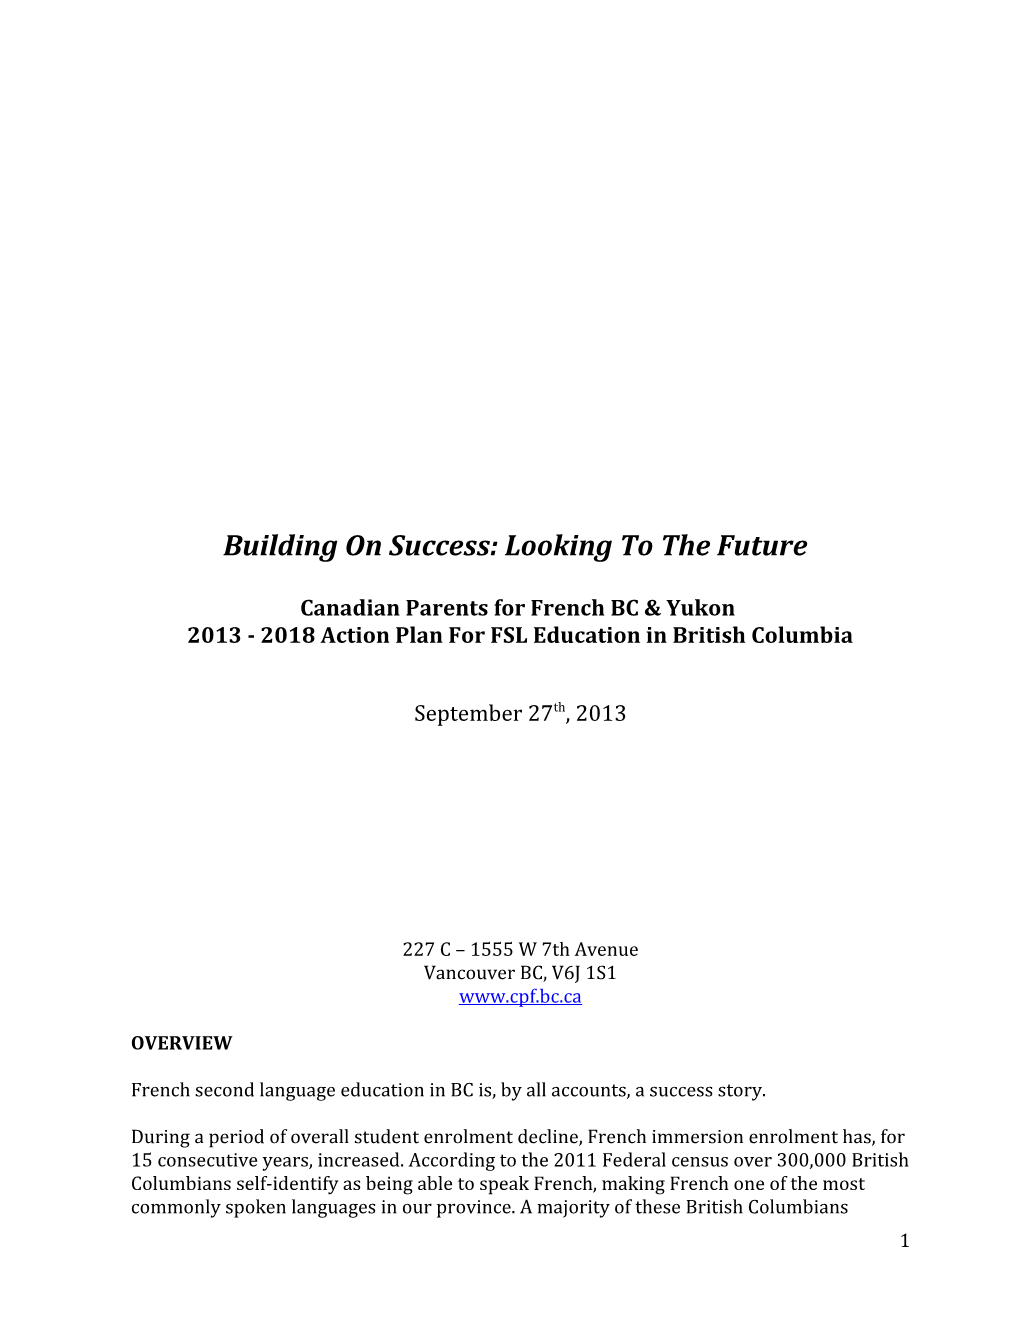 Building on Success: Looking to the Future